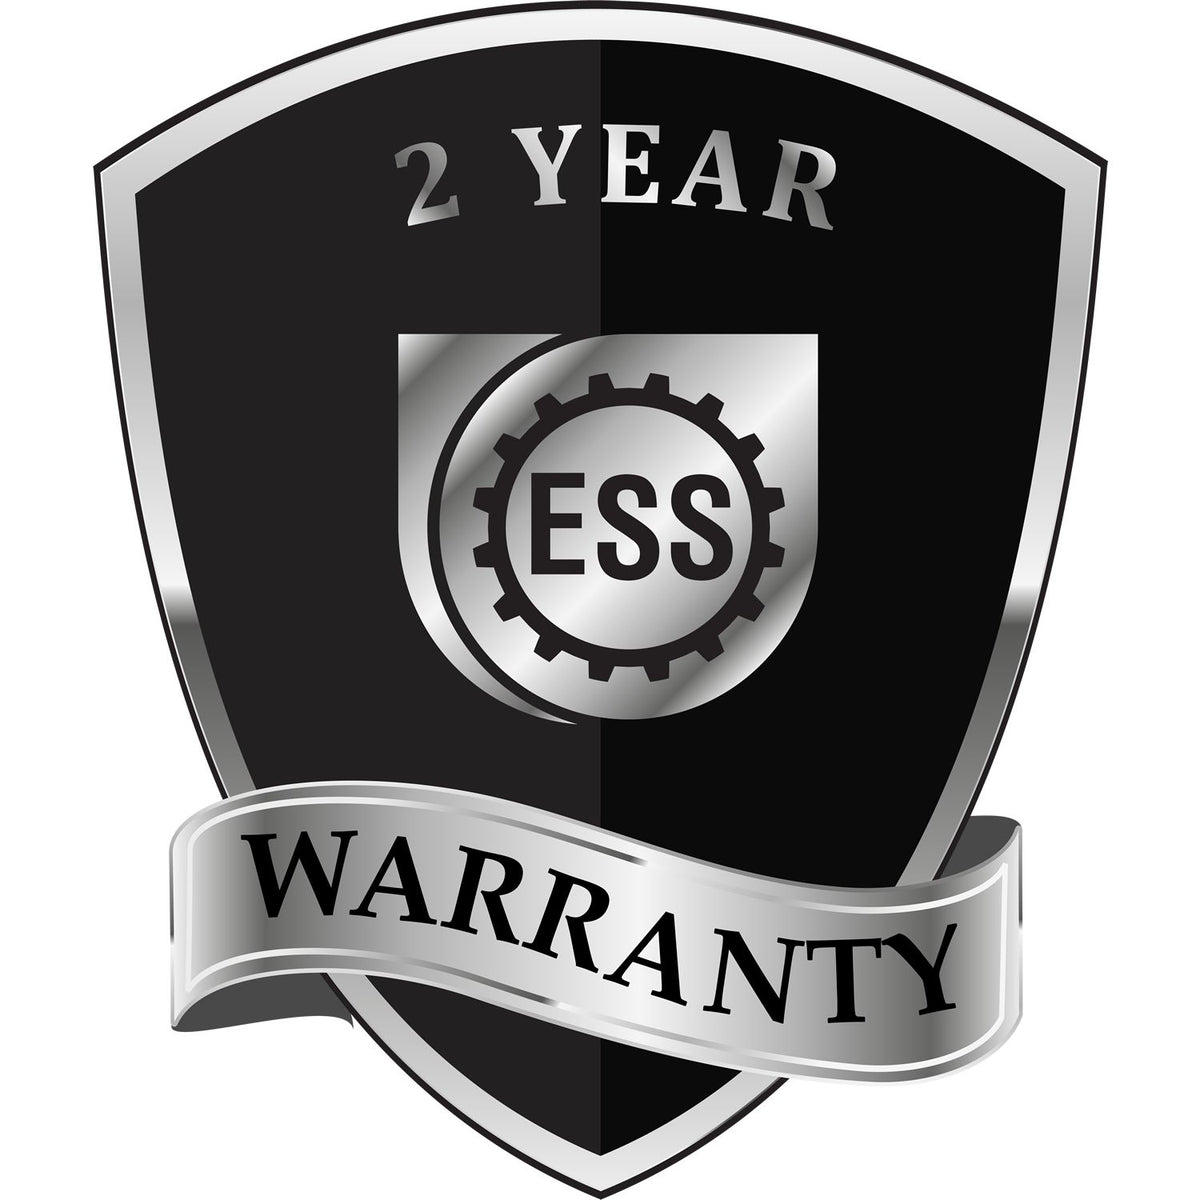 A black and silver badge or emblem showing warranty information for the Gift California Engineer Seal